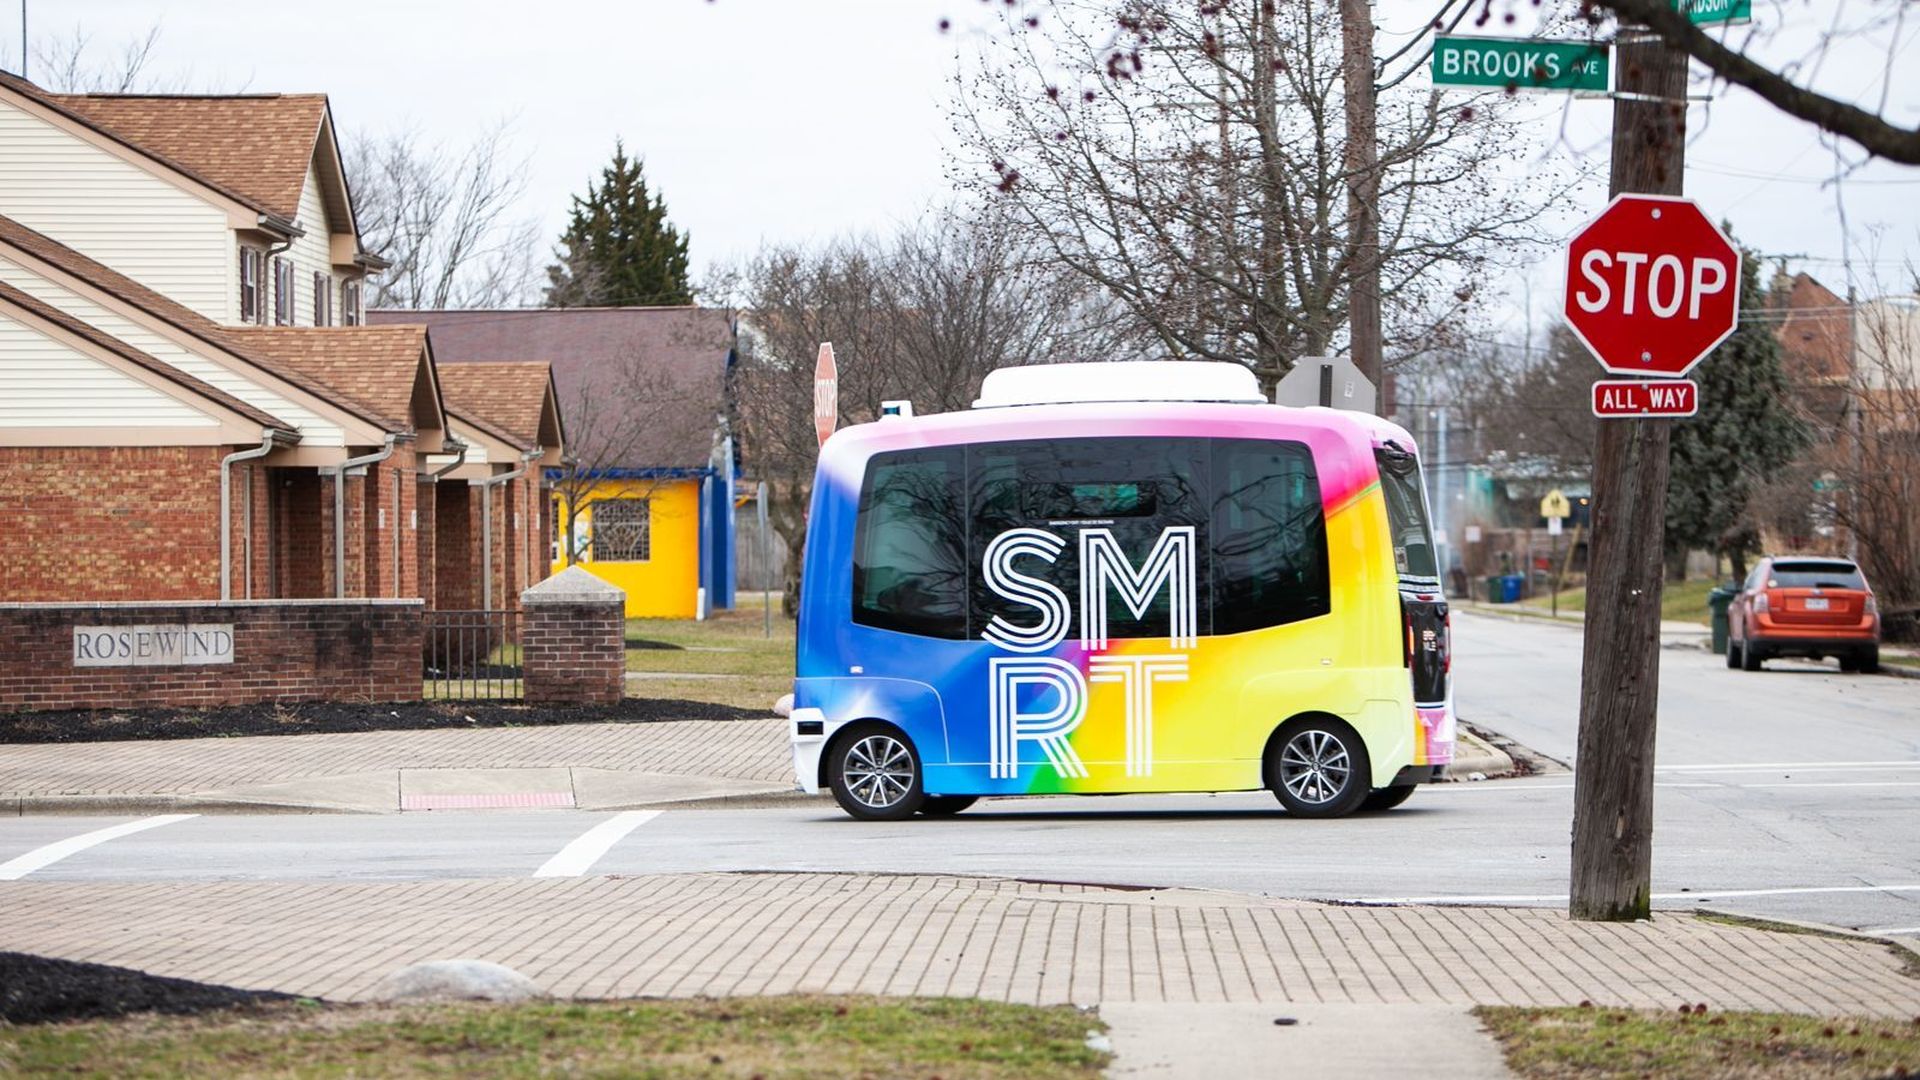 A photo of Columbus' self-driving shuttle parked in a neighborhood